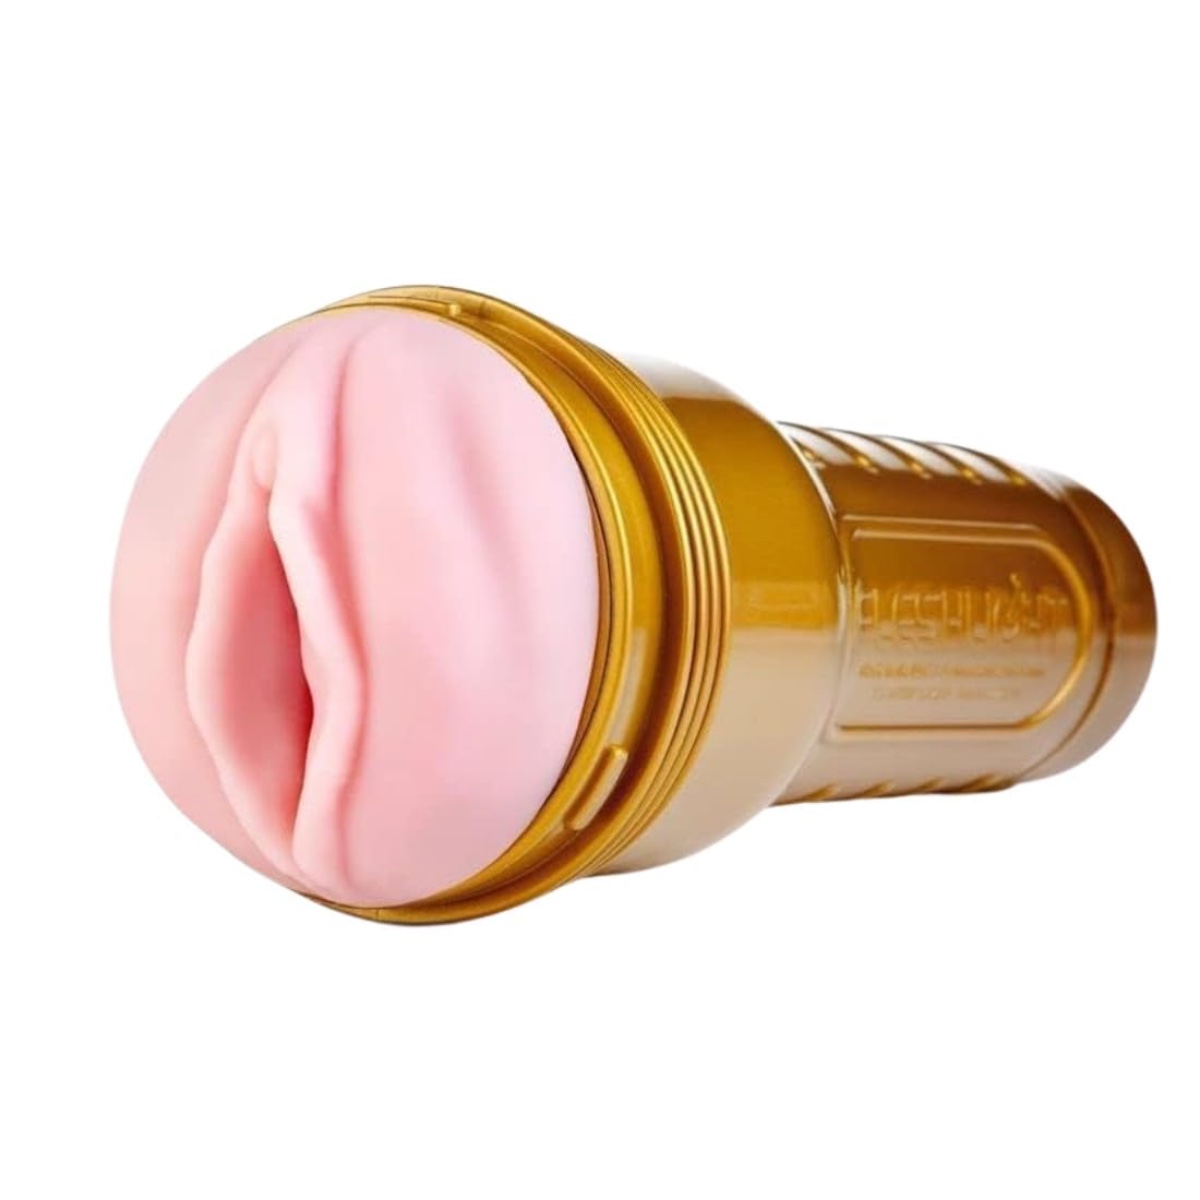 Fleshlight FAQ: Answers to Common Questions